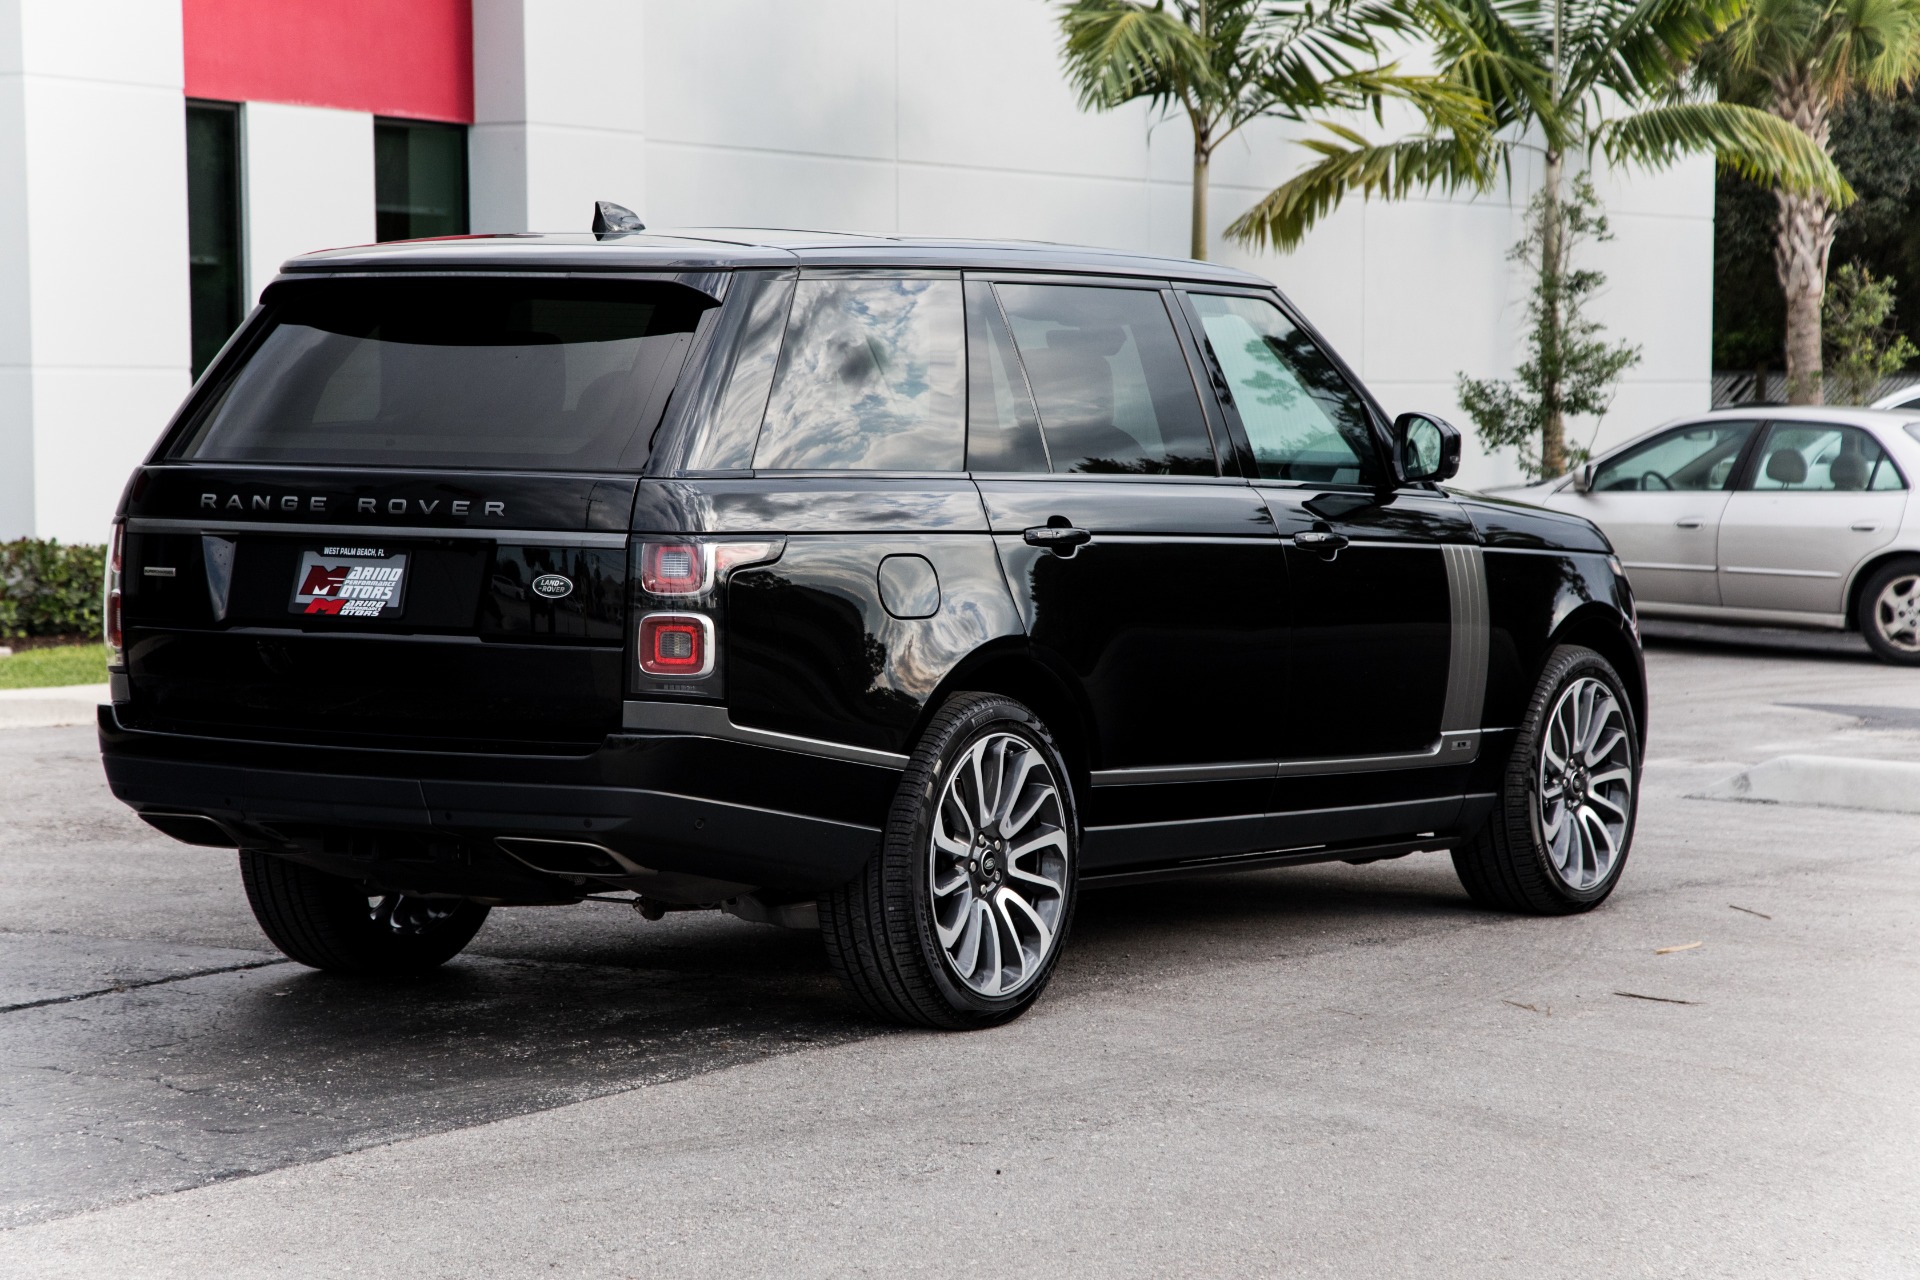 Used 2019 Land Rover Range Rover Supercharged LWB For Sale 112 900 